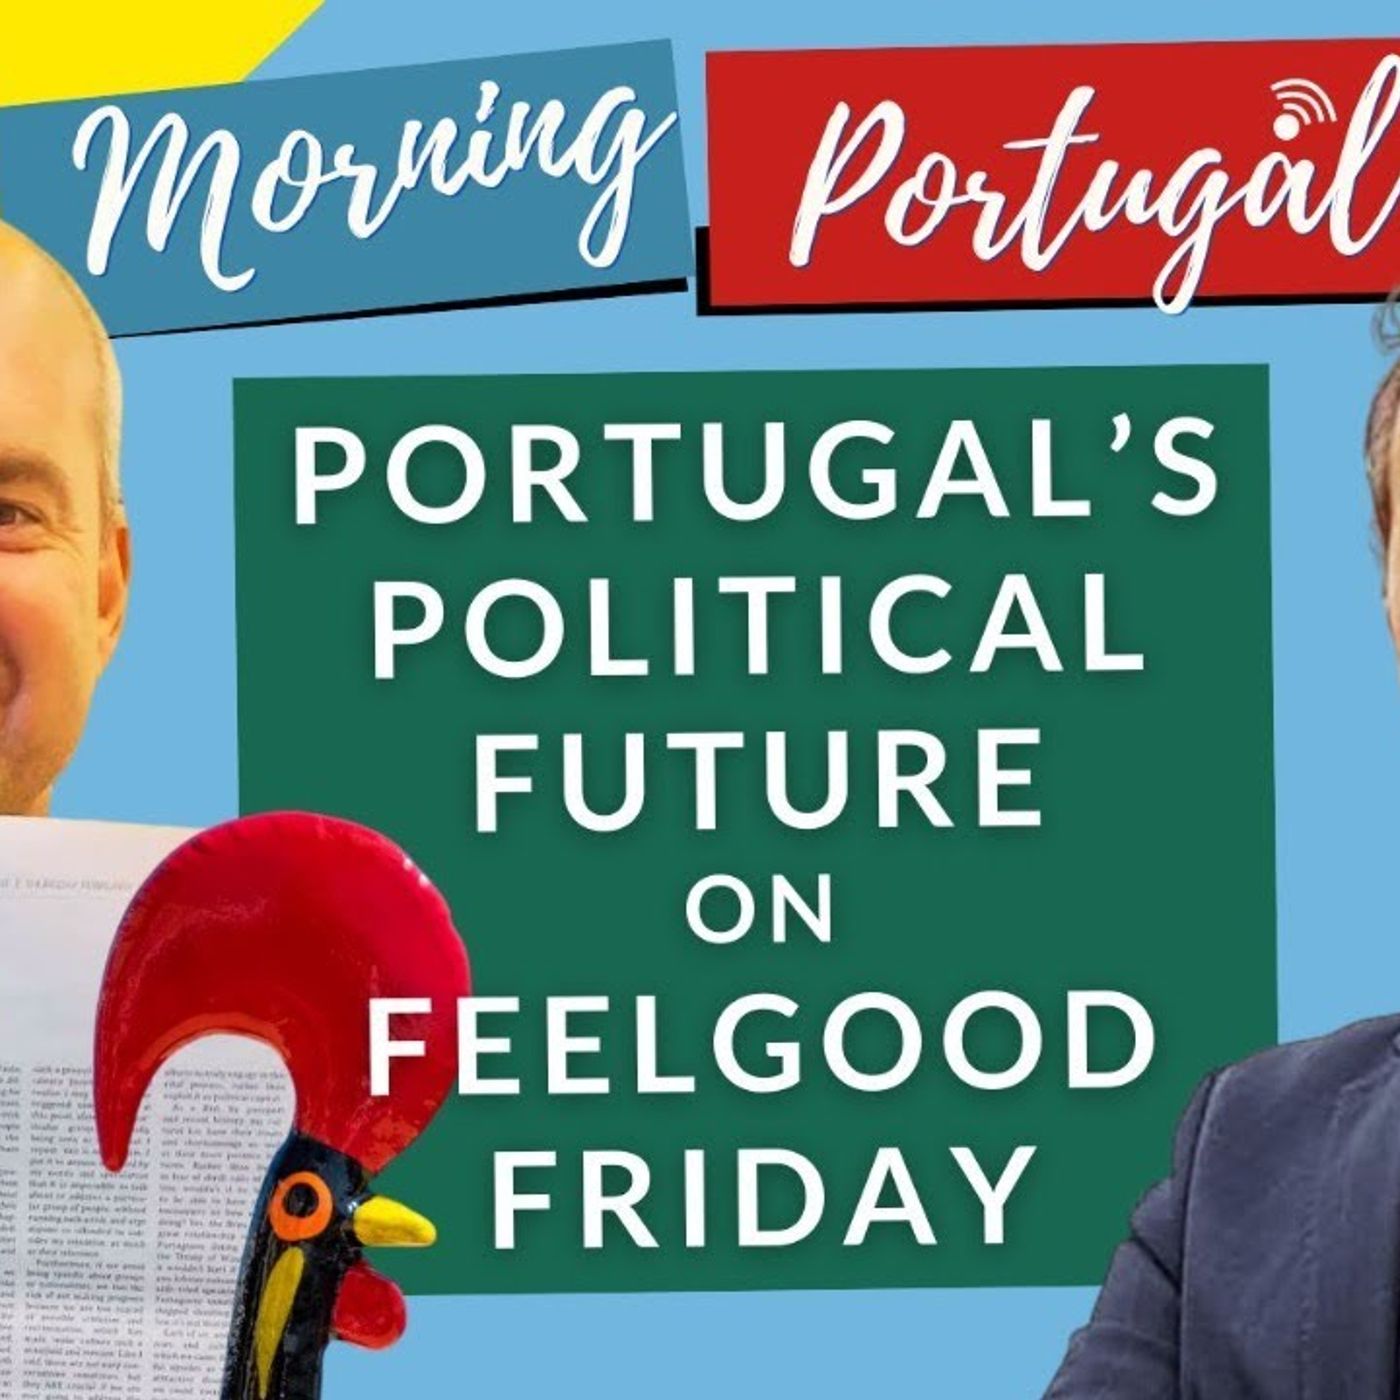 Portugal's Political Future on Good Morning Portugal's Feelgood Friday Show